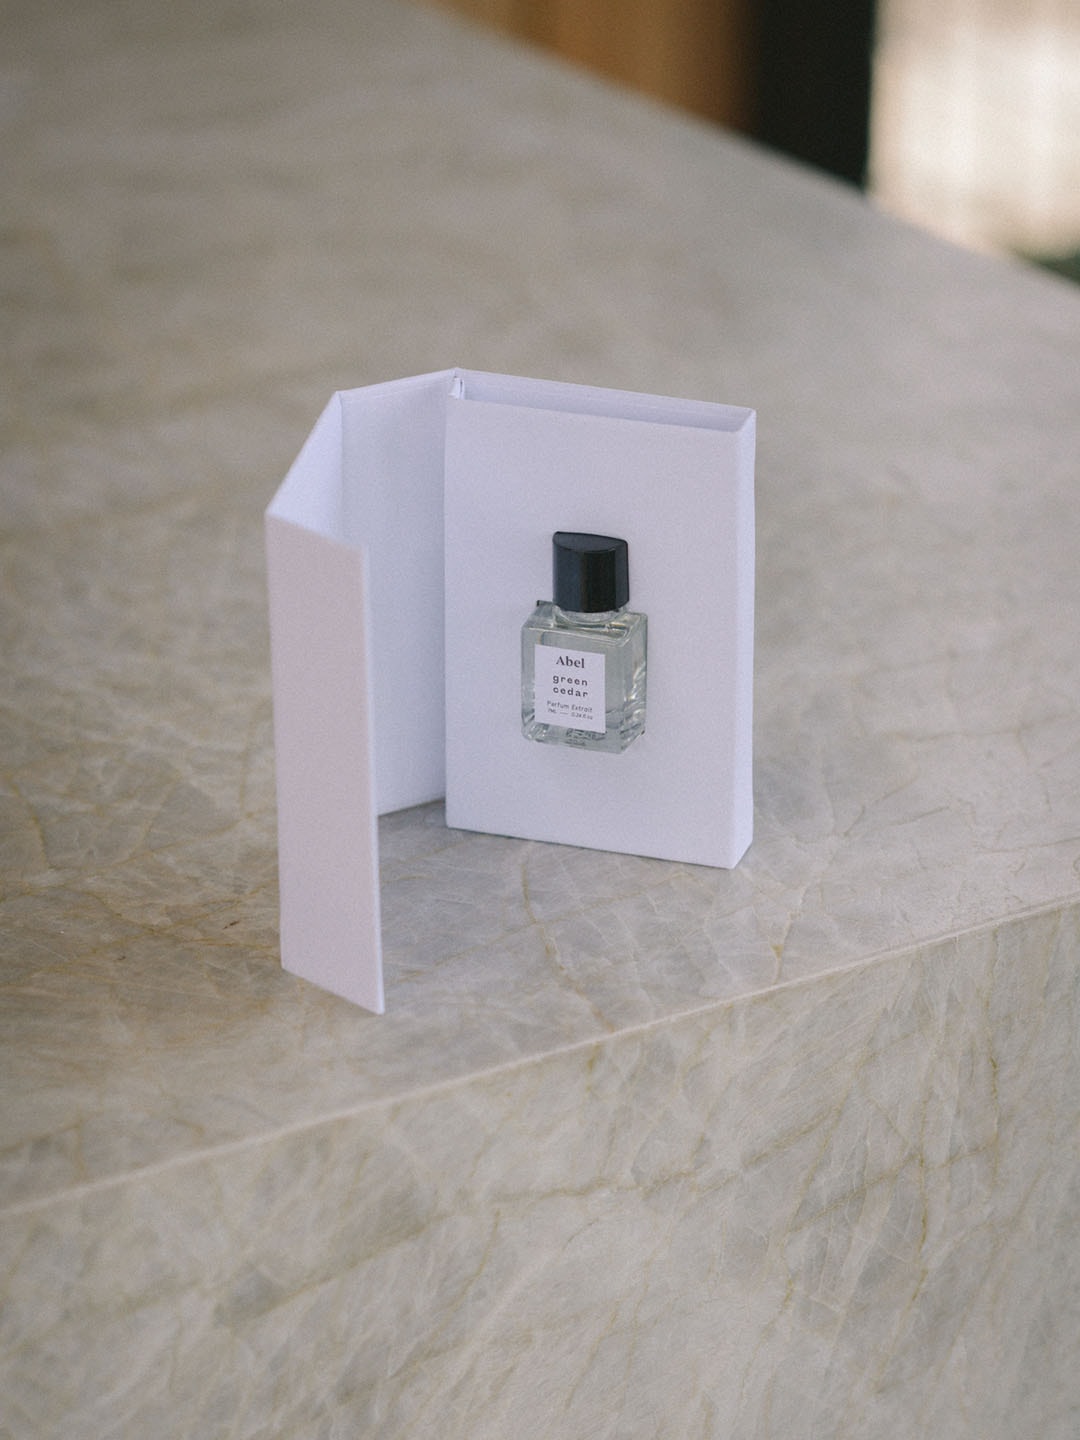 A small bottle of Abel&#39;s Green Cedar Parfum Extrait – for vitality, emitting a captivating scent and labeled as a natural parfum extrait, sitting on a table.